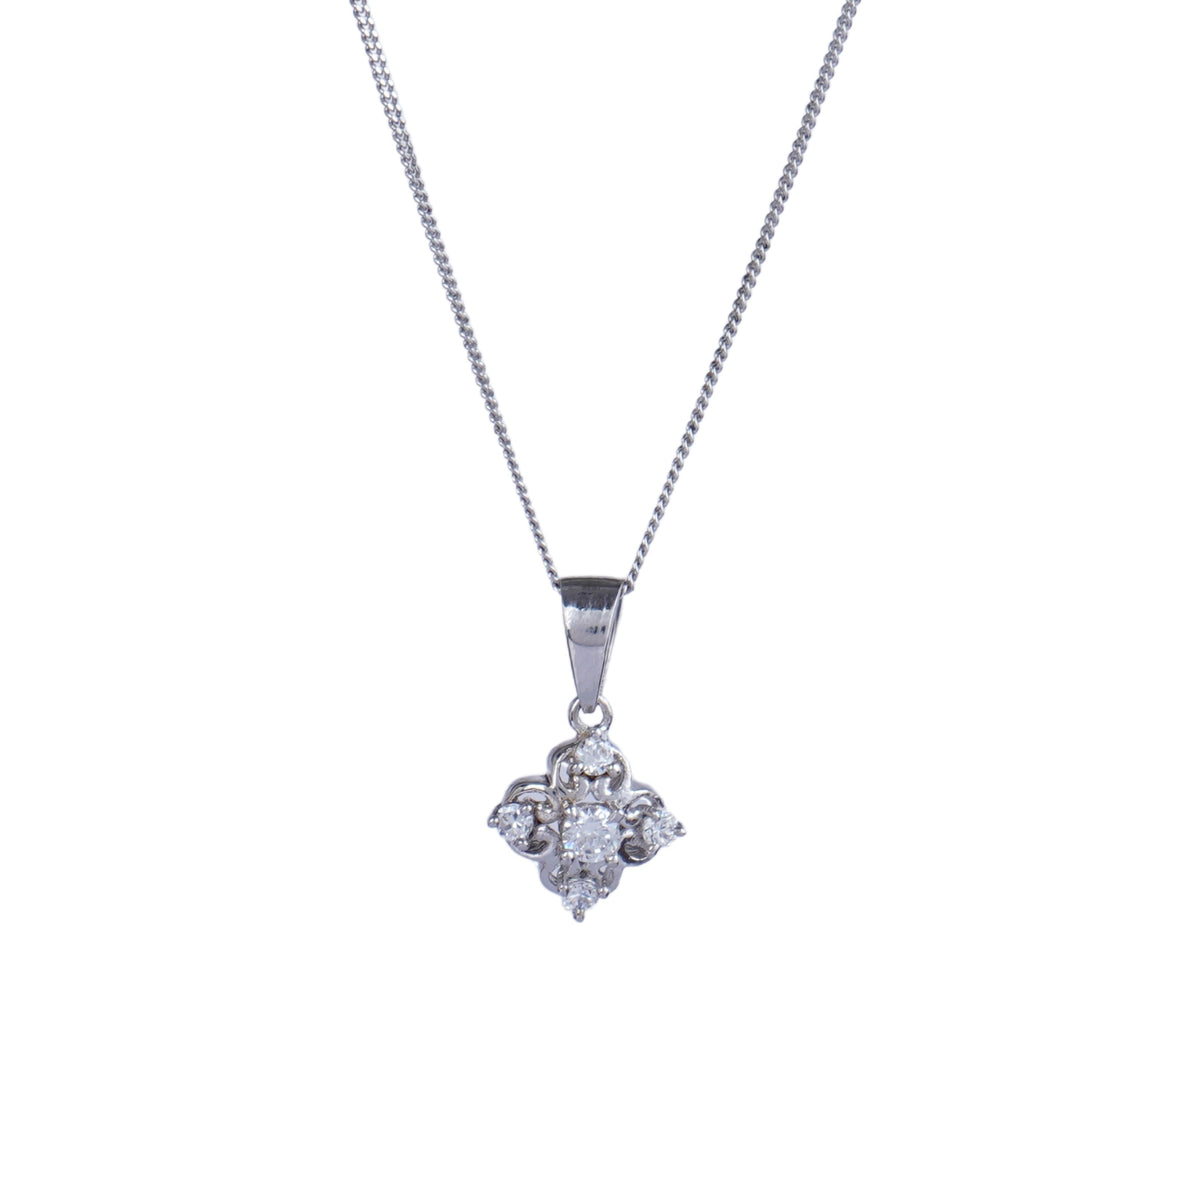 Silver Flower Style Chain Pendant